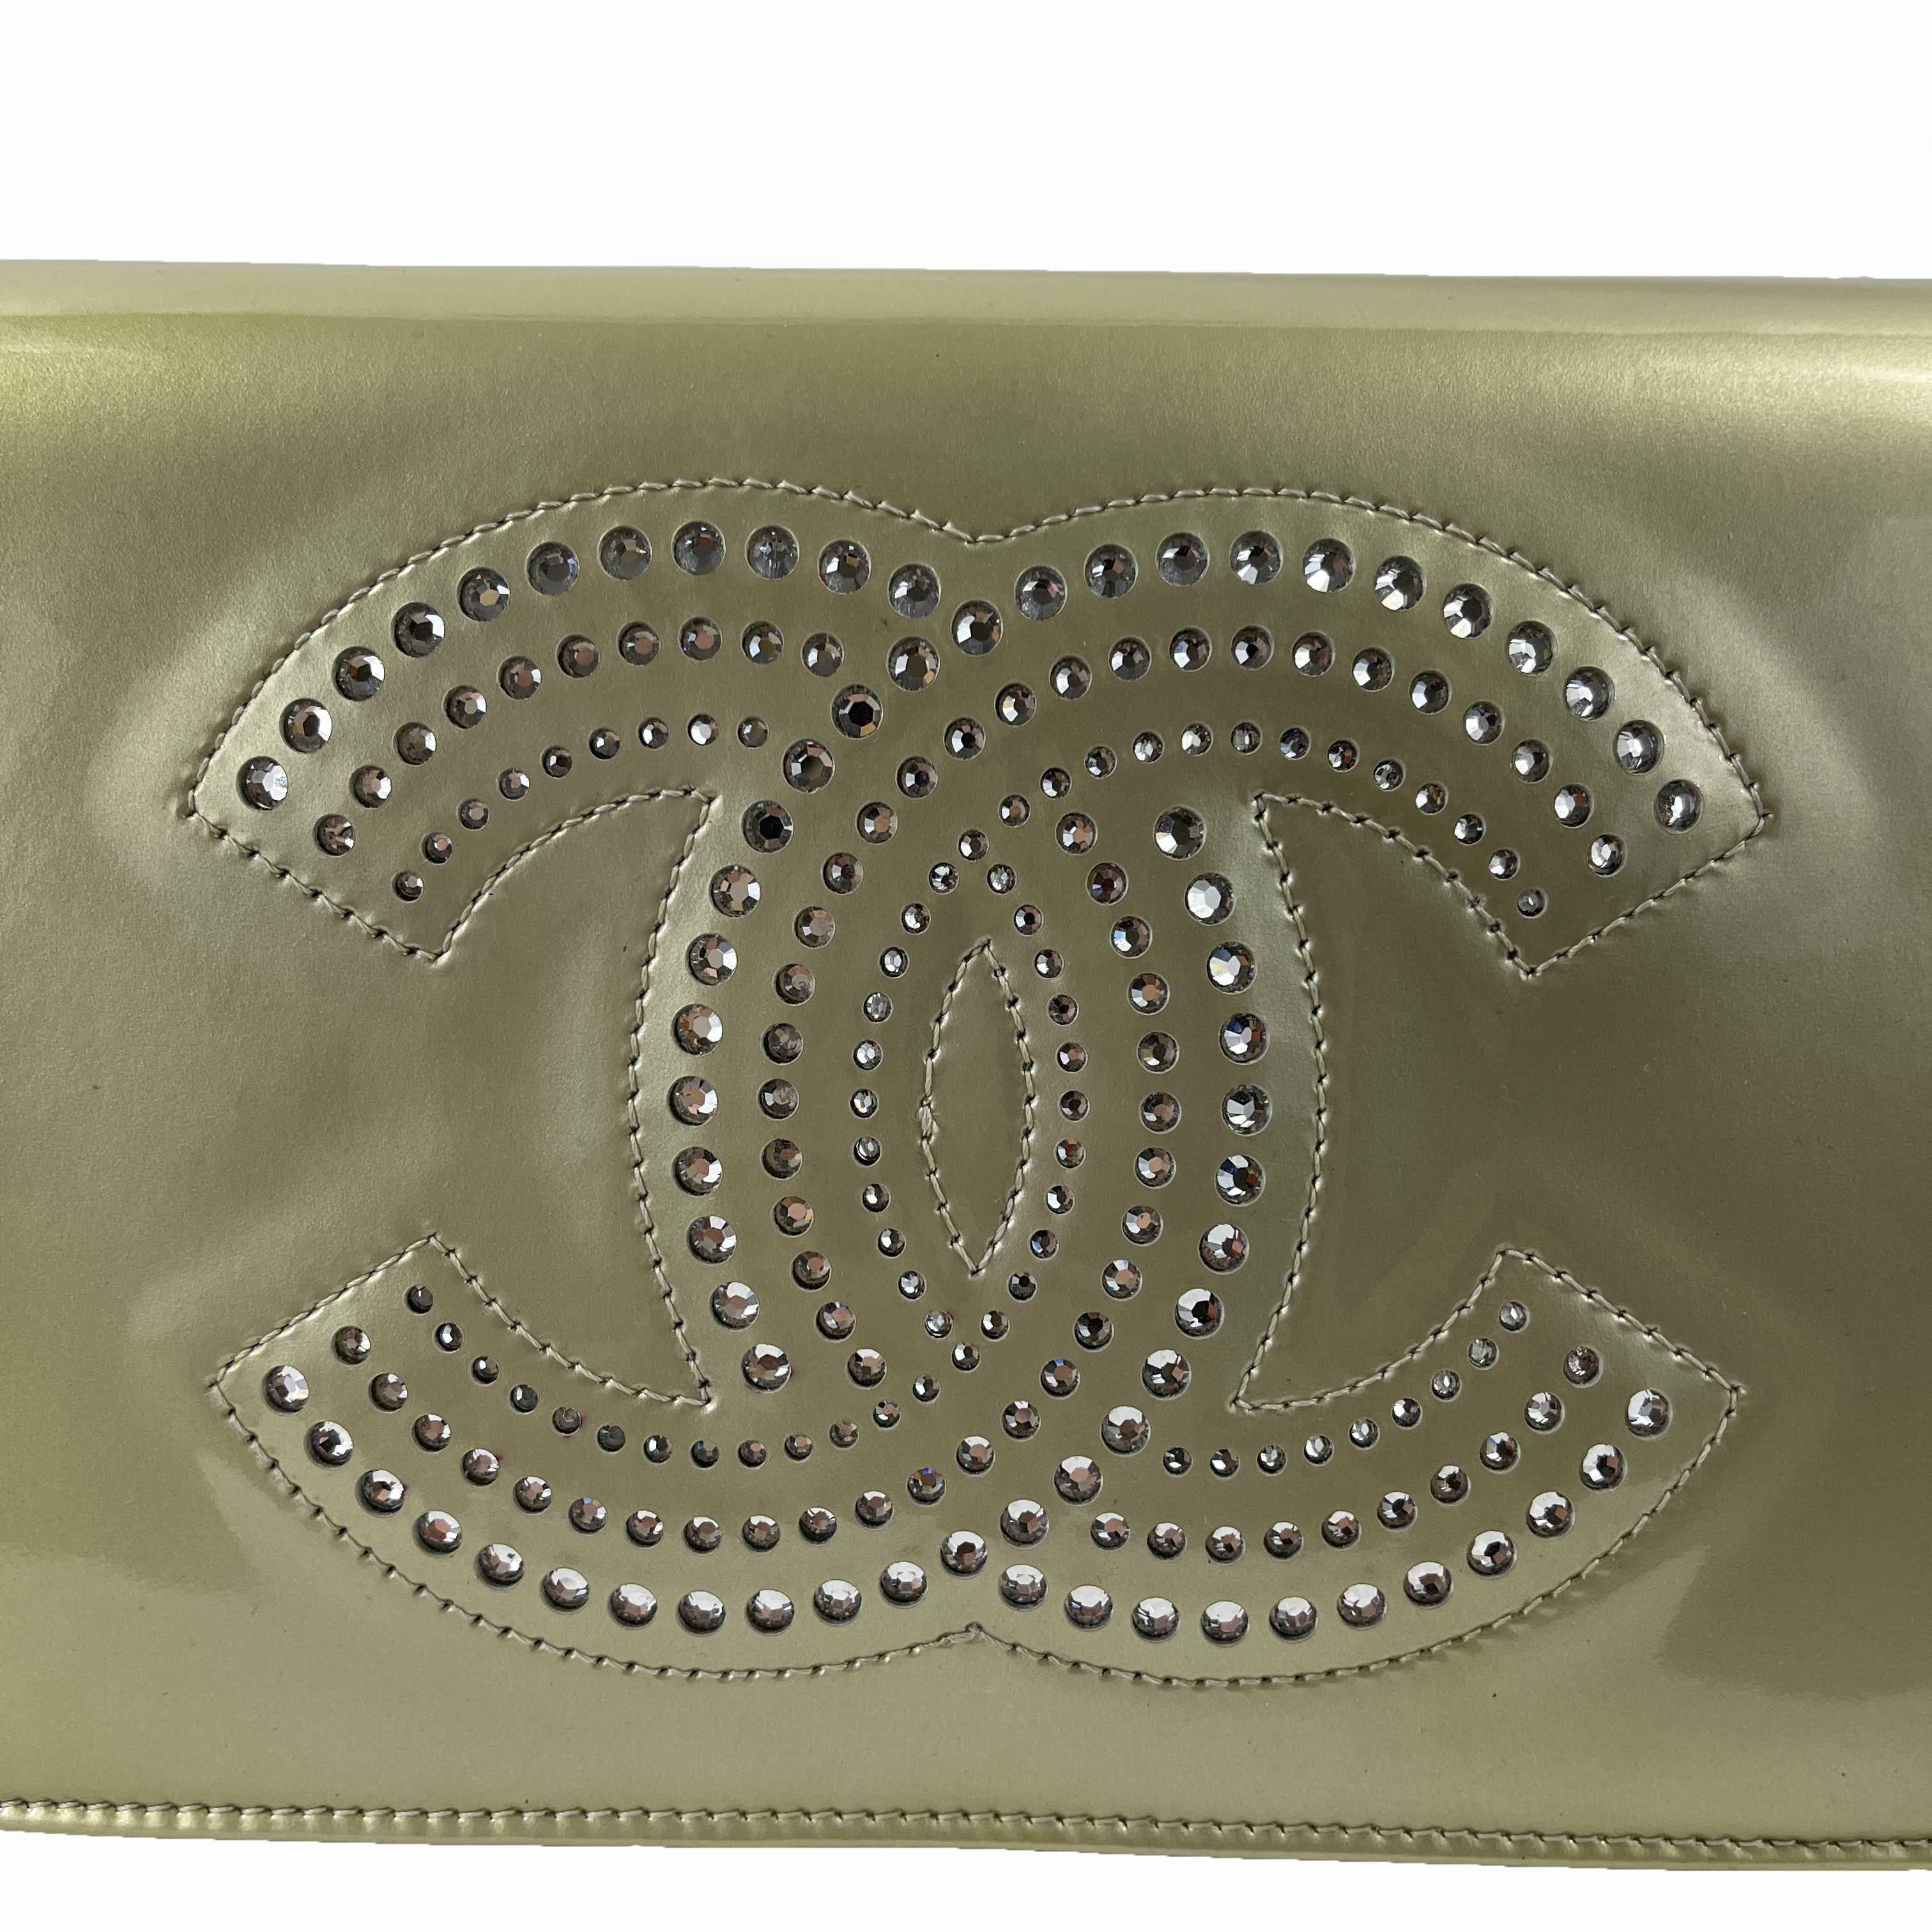 Women's CHANEL CC Strass Champagne Patent Leather WOC Wallet on Chain Crossbody